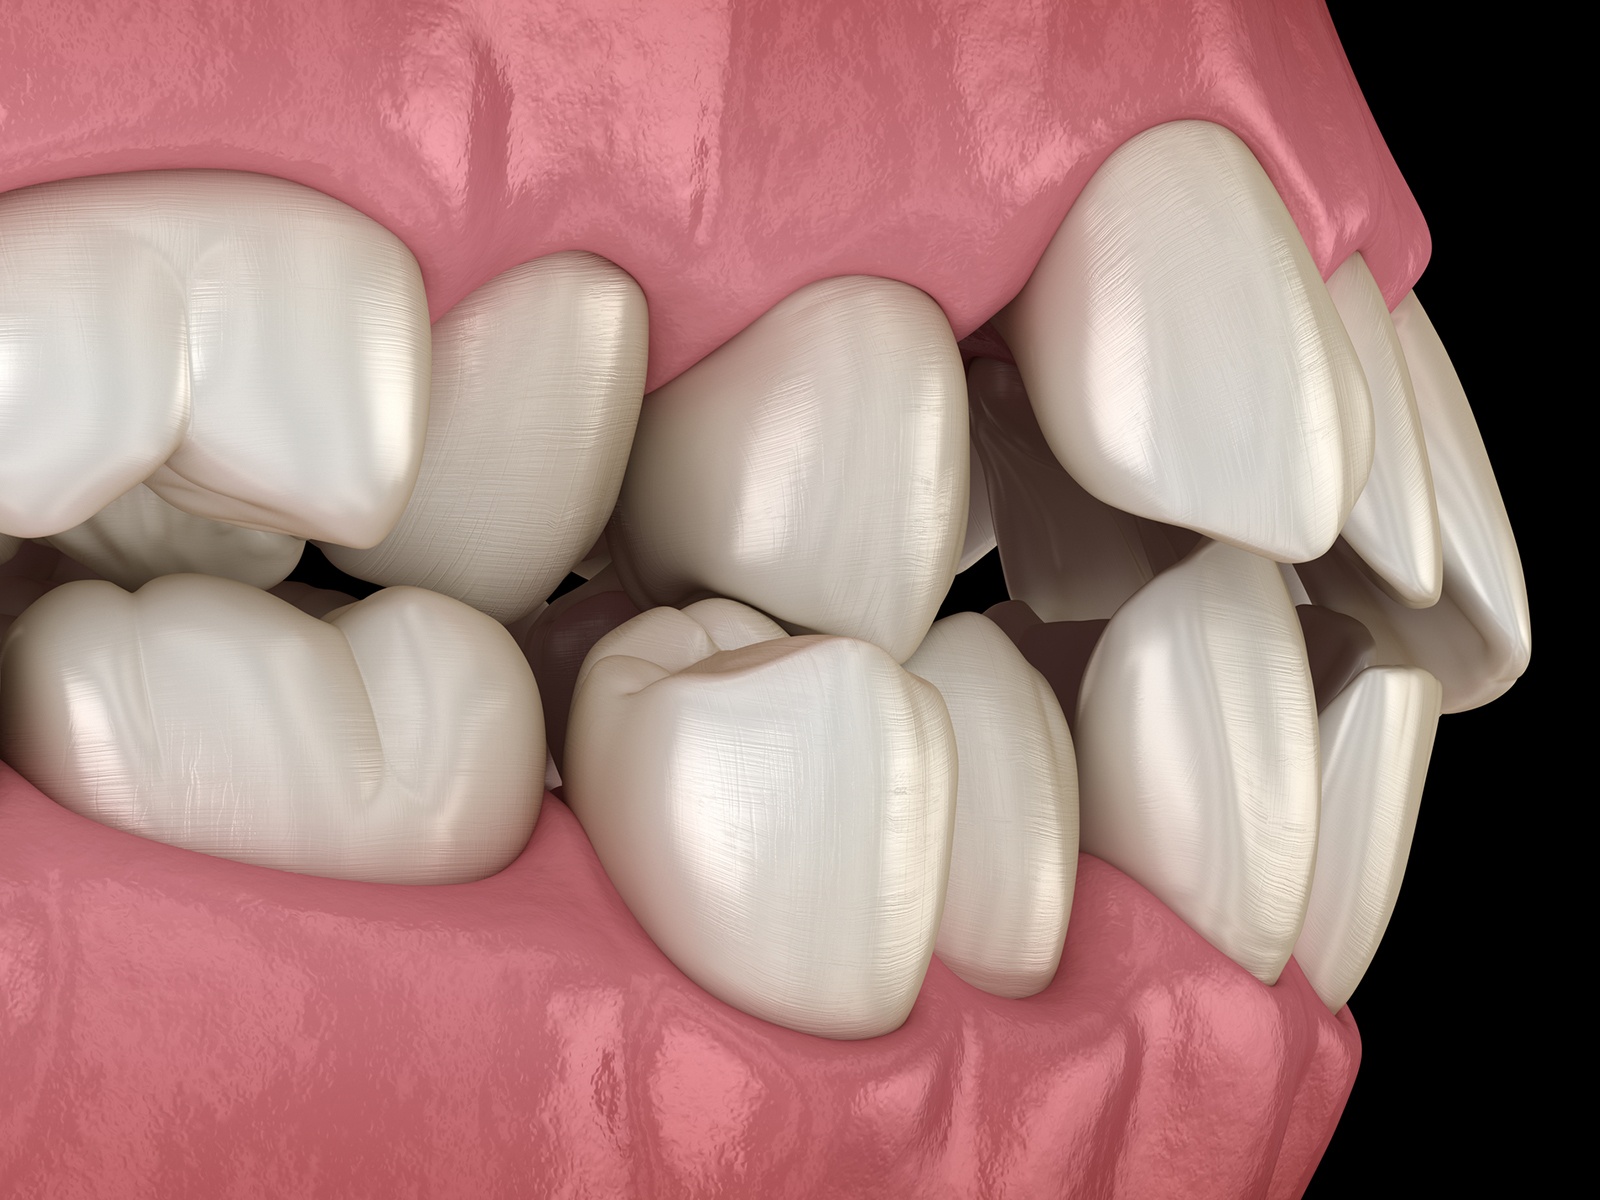 What Causes Protruding Teeth in Adults?